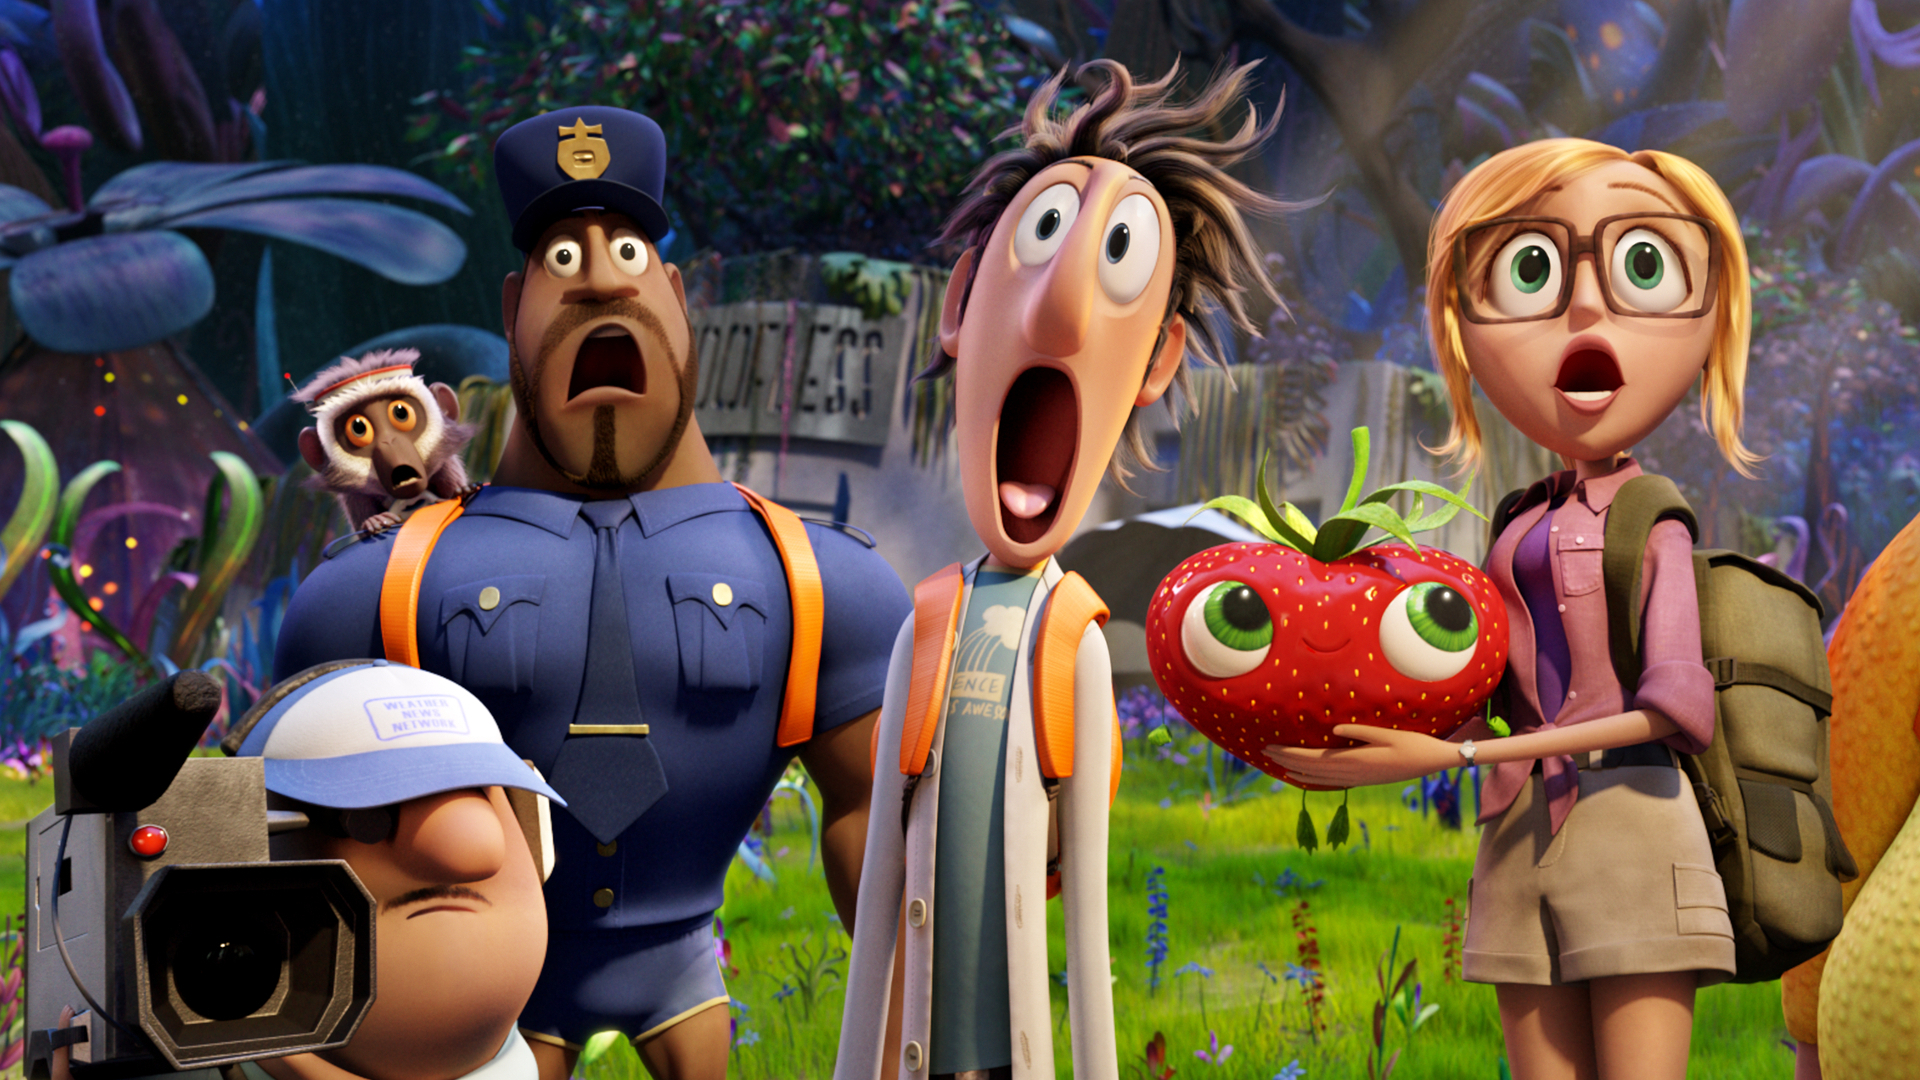 Cloudy With A Chance Of Meatballs 2 Movie Flint Lockwood Sam Sparks Steve Cloudy With A Chance Of Me 1920x1080